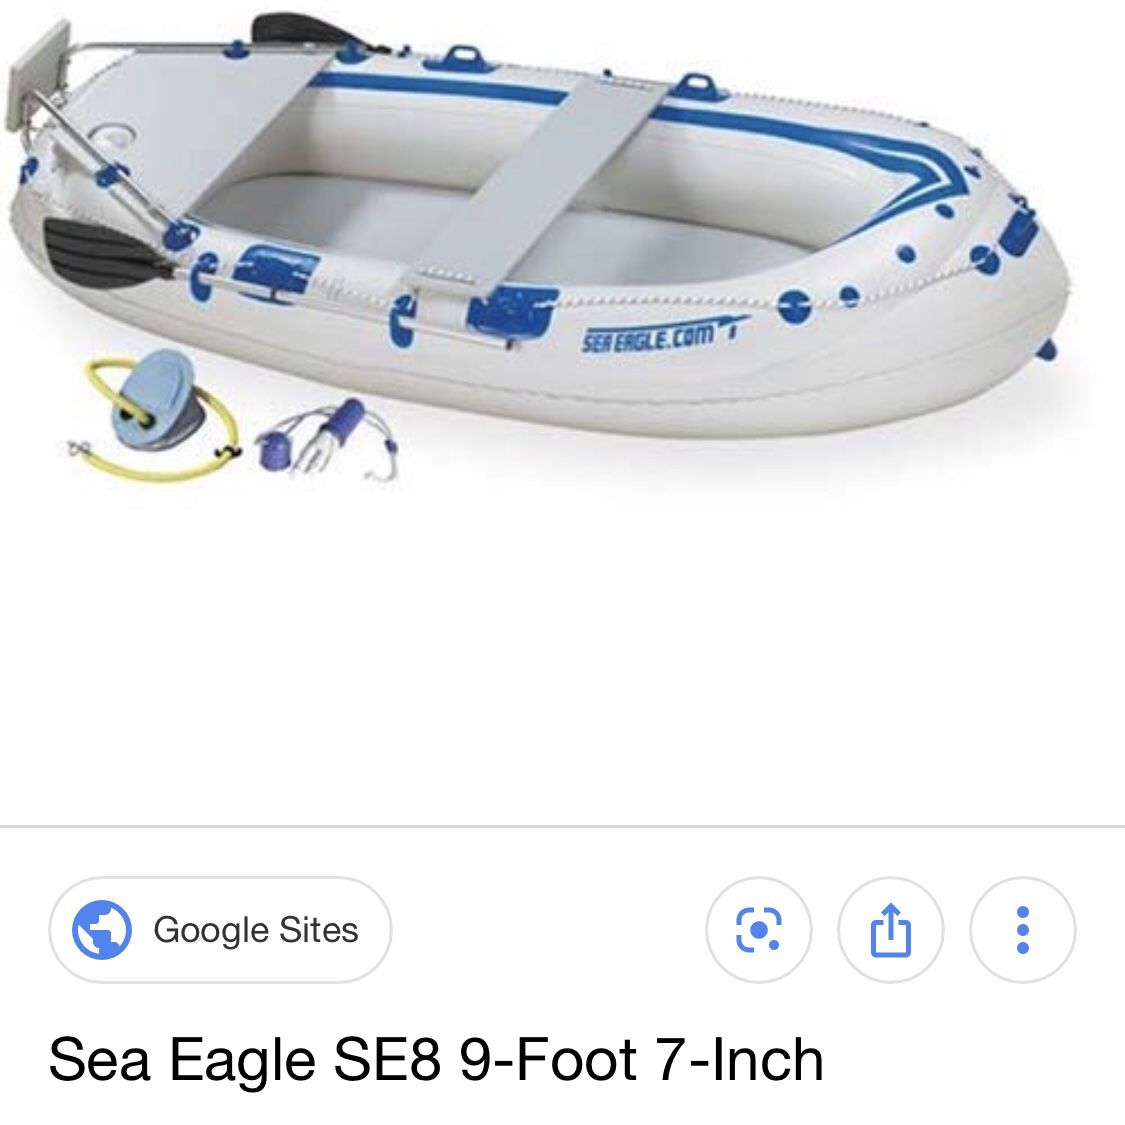 sea eagle 8se inflatable fishing boat only used 5 times ! Also the boat is titled and has good tags